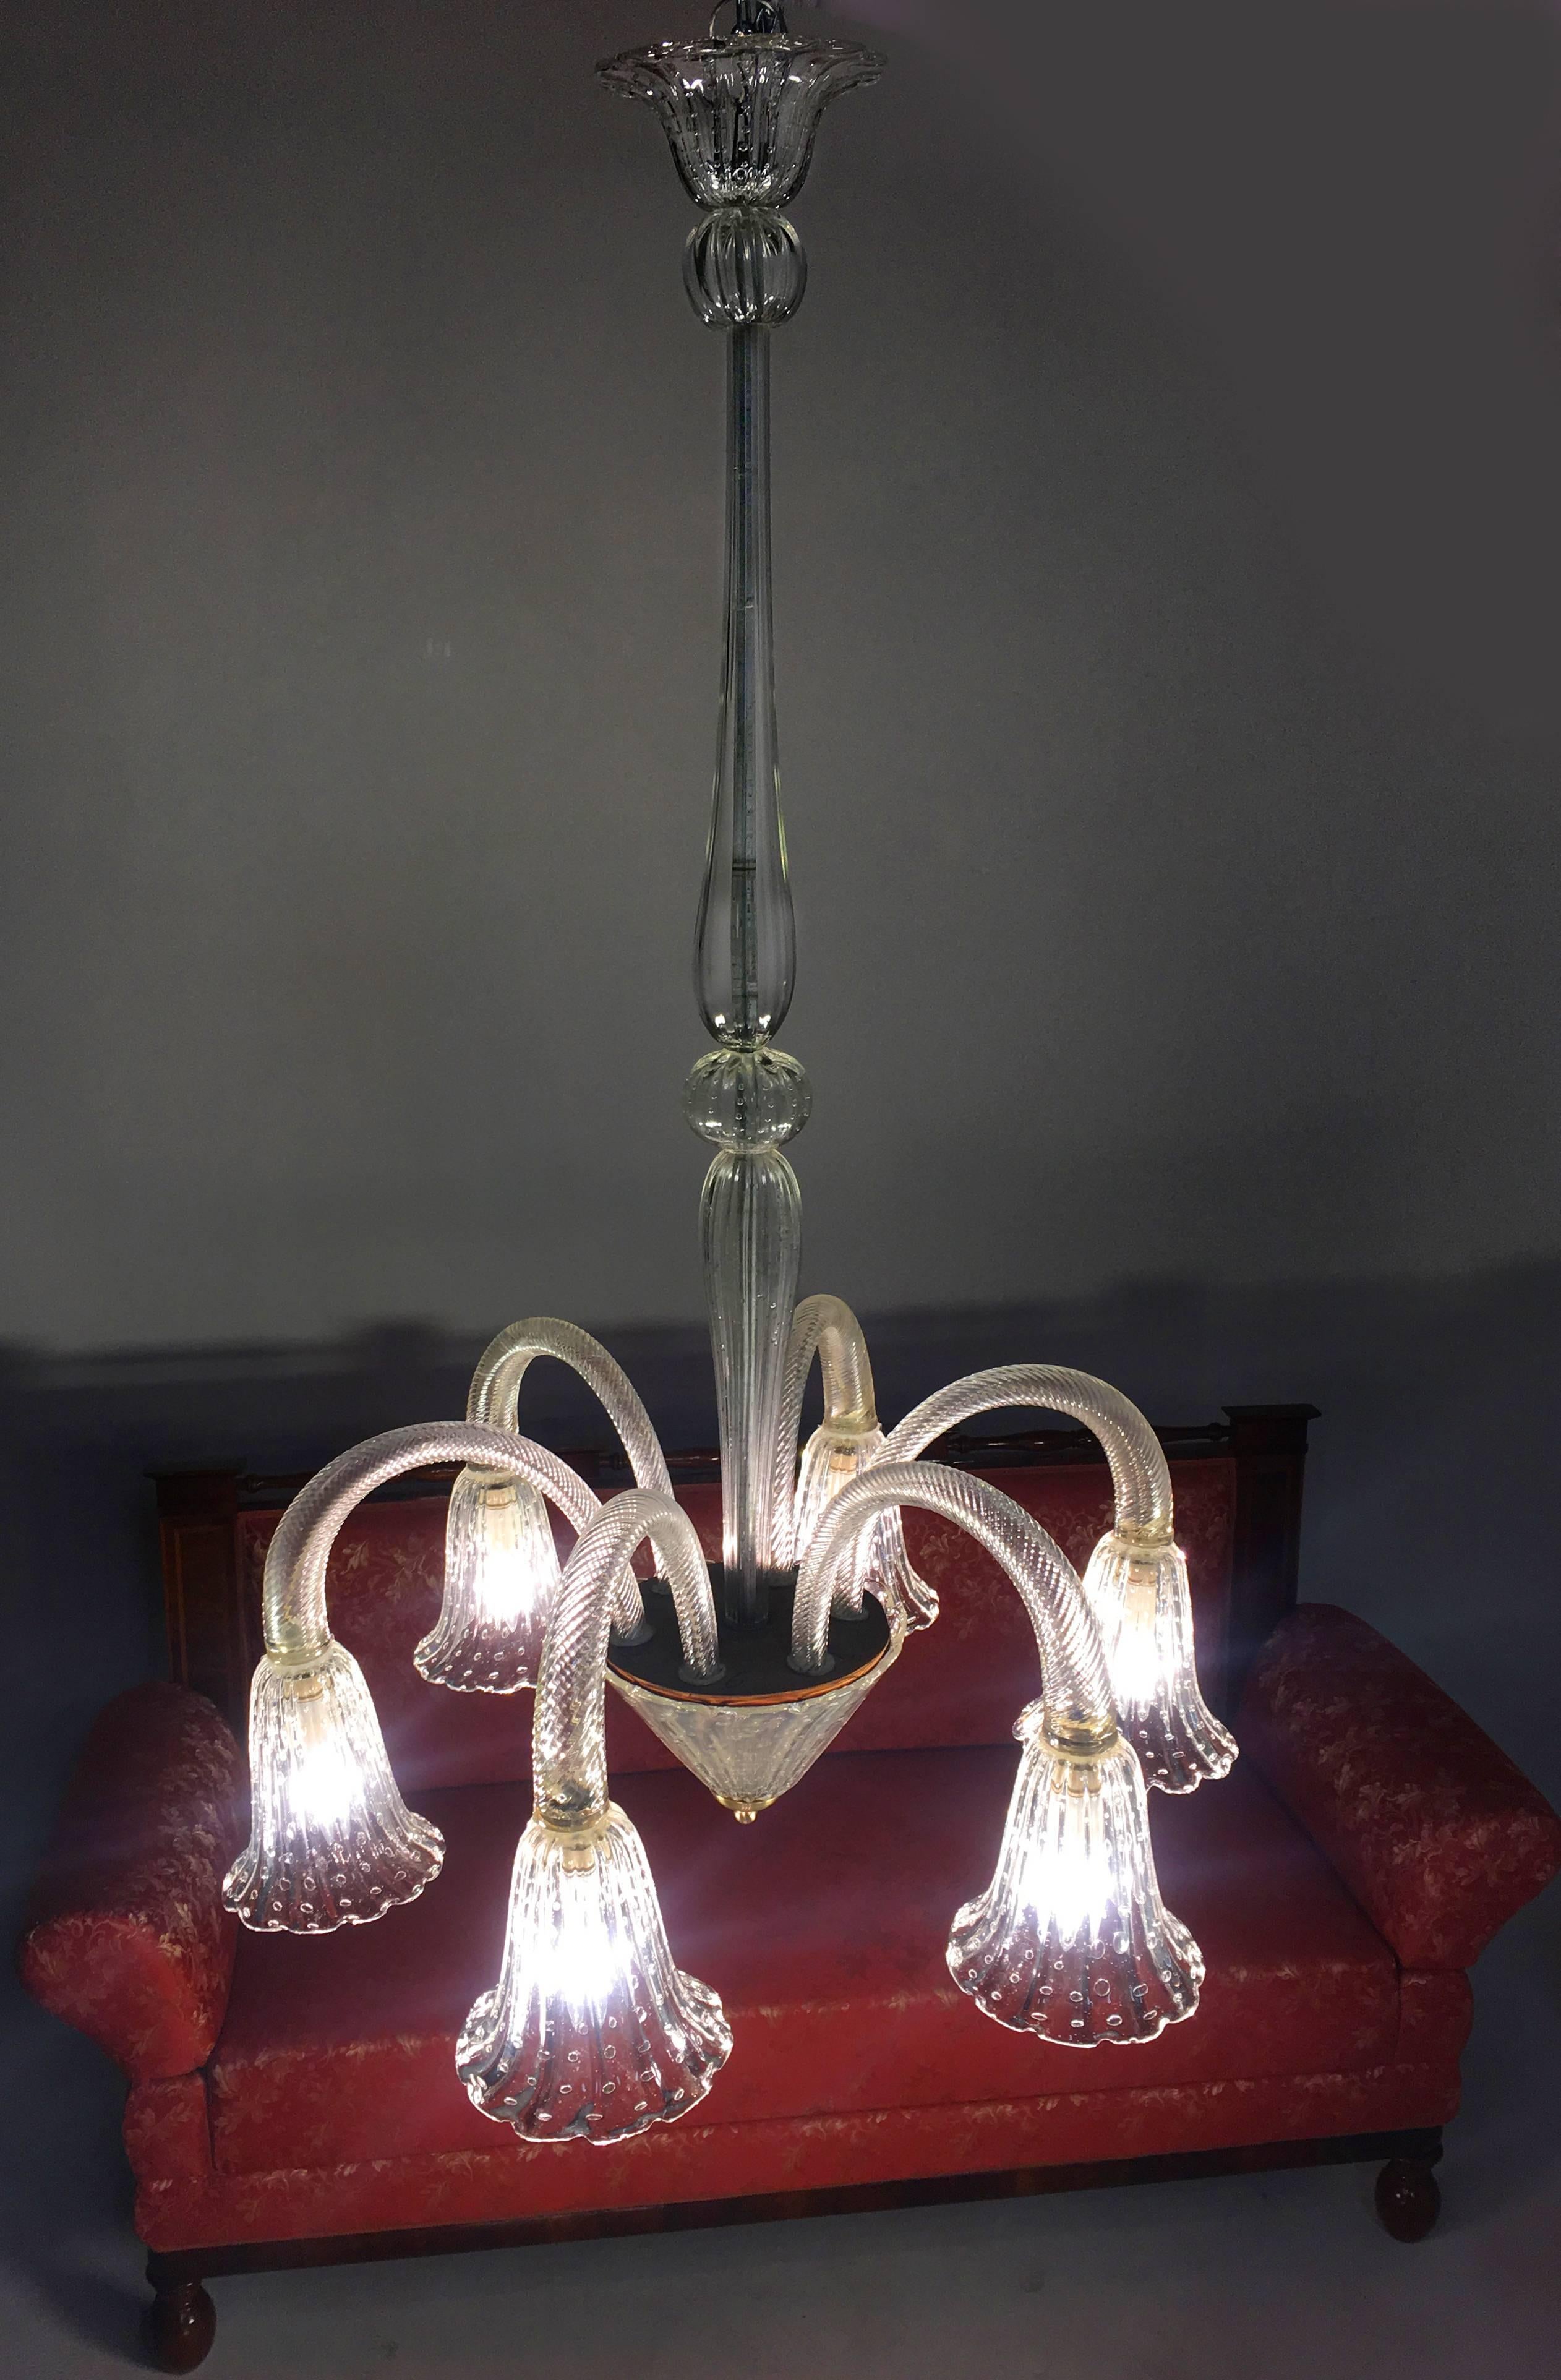 Amazing and elegant handblown Bulicante Murano chandelier by Ercole Barovier, circa 1940.
Measure: Diameter cm 70
Height cm 115
From Private collection.